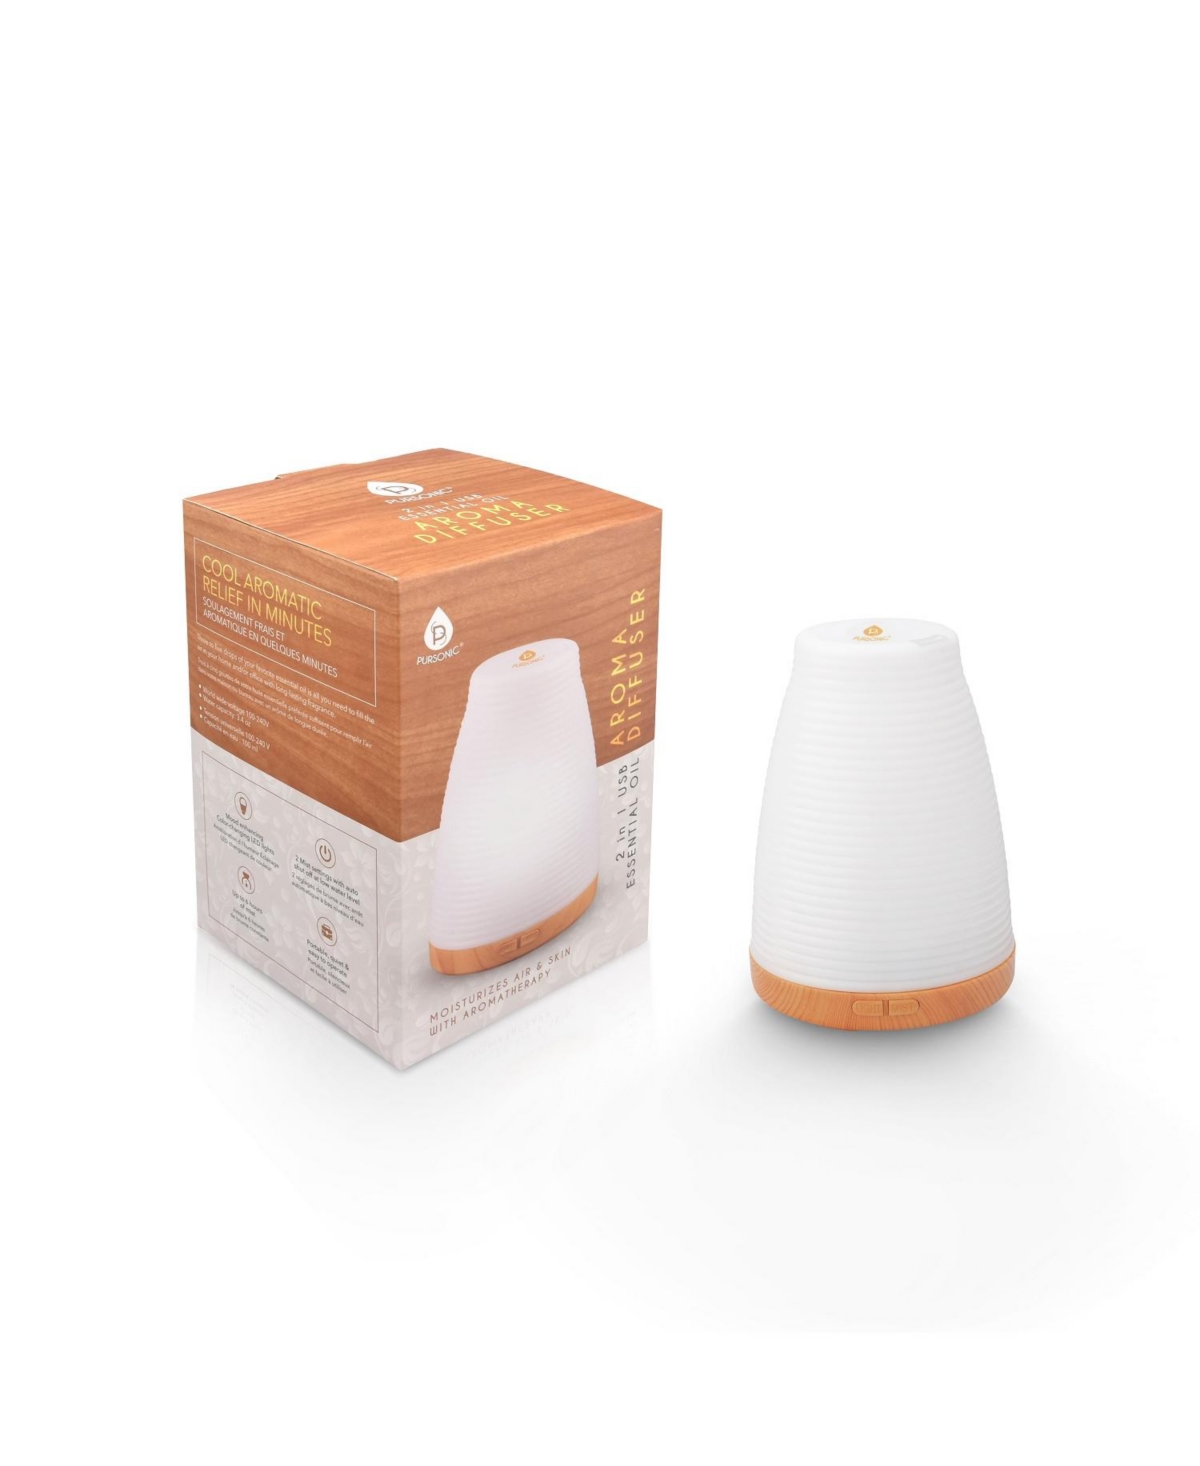 Essential Oil Usb Diffuser for Aromatherapy and Home Decor - White